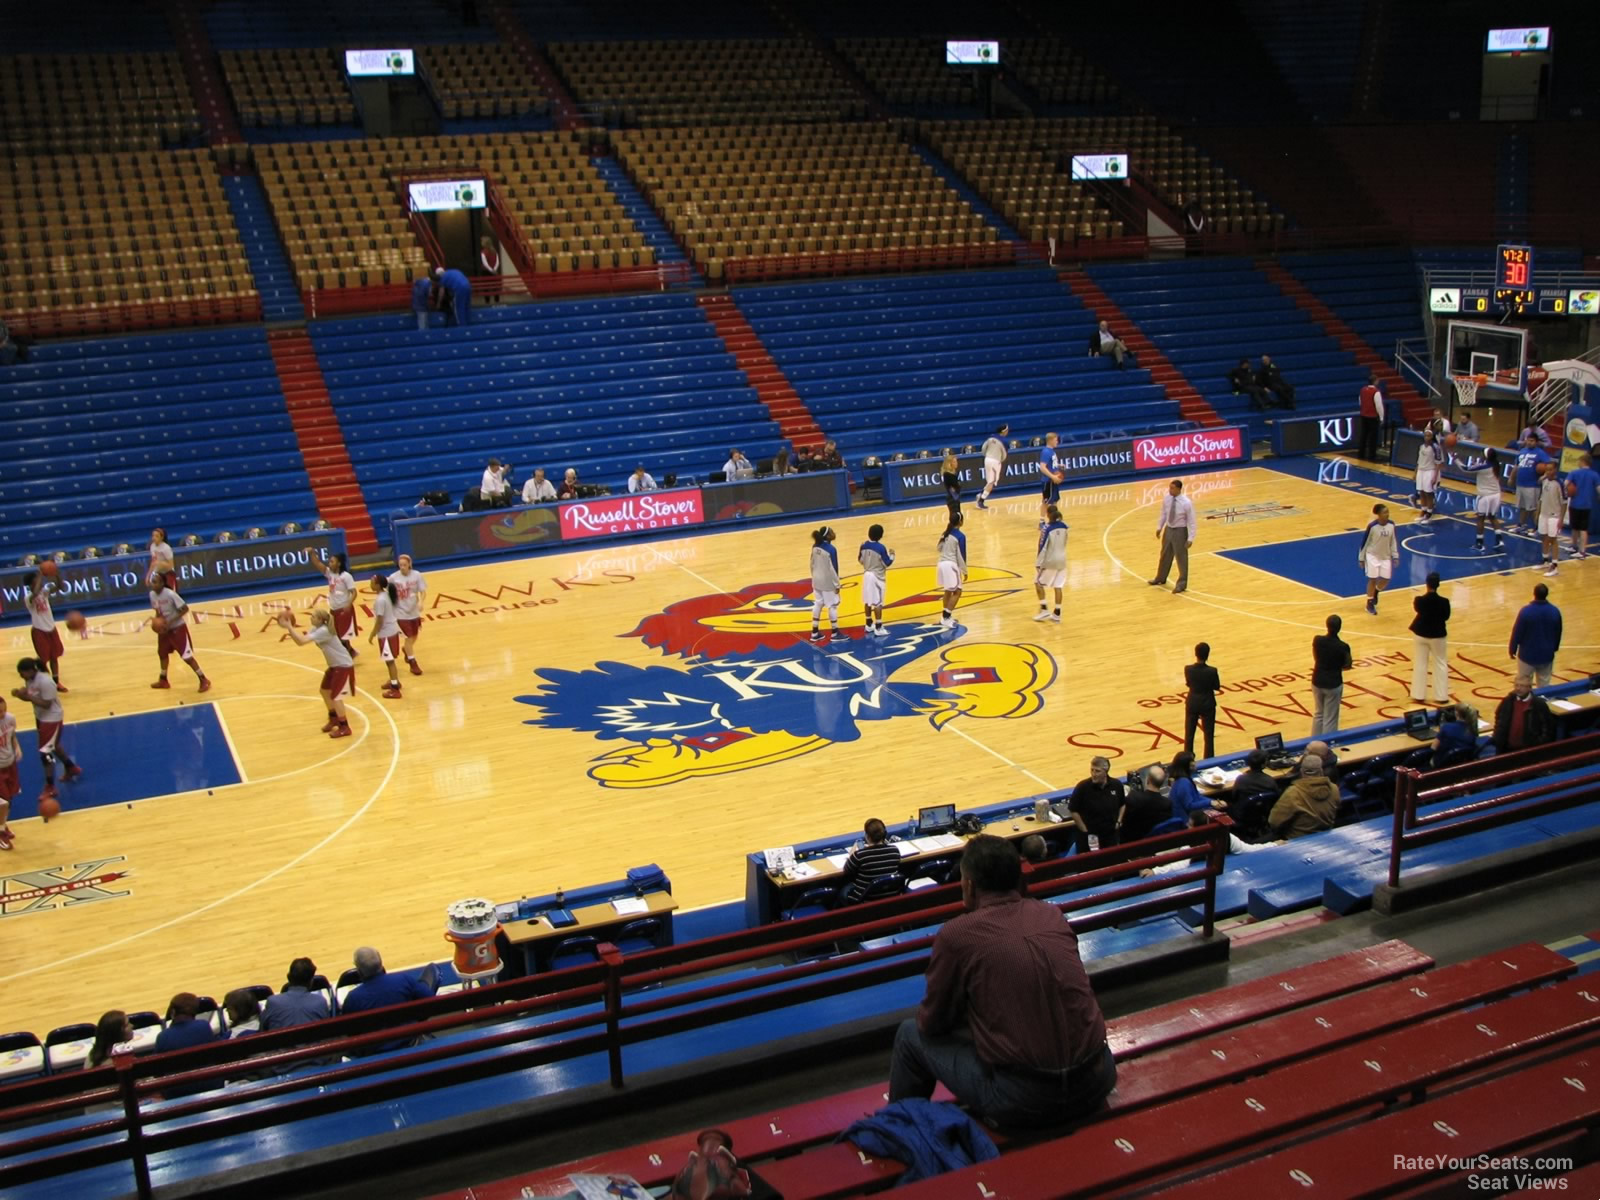 section 18, row 8 seat view  - allen fieldhouse